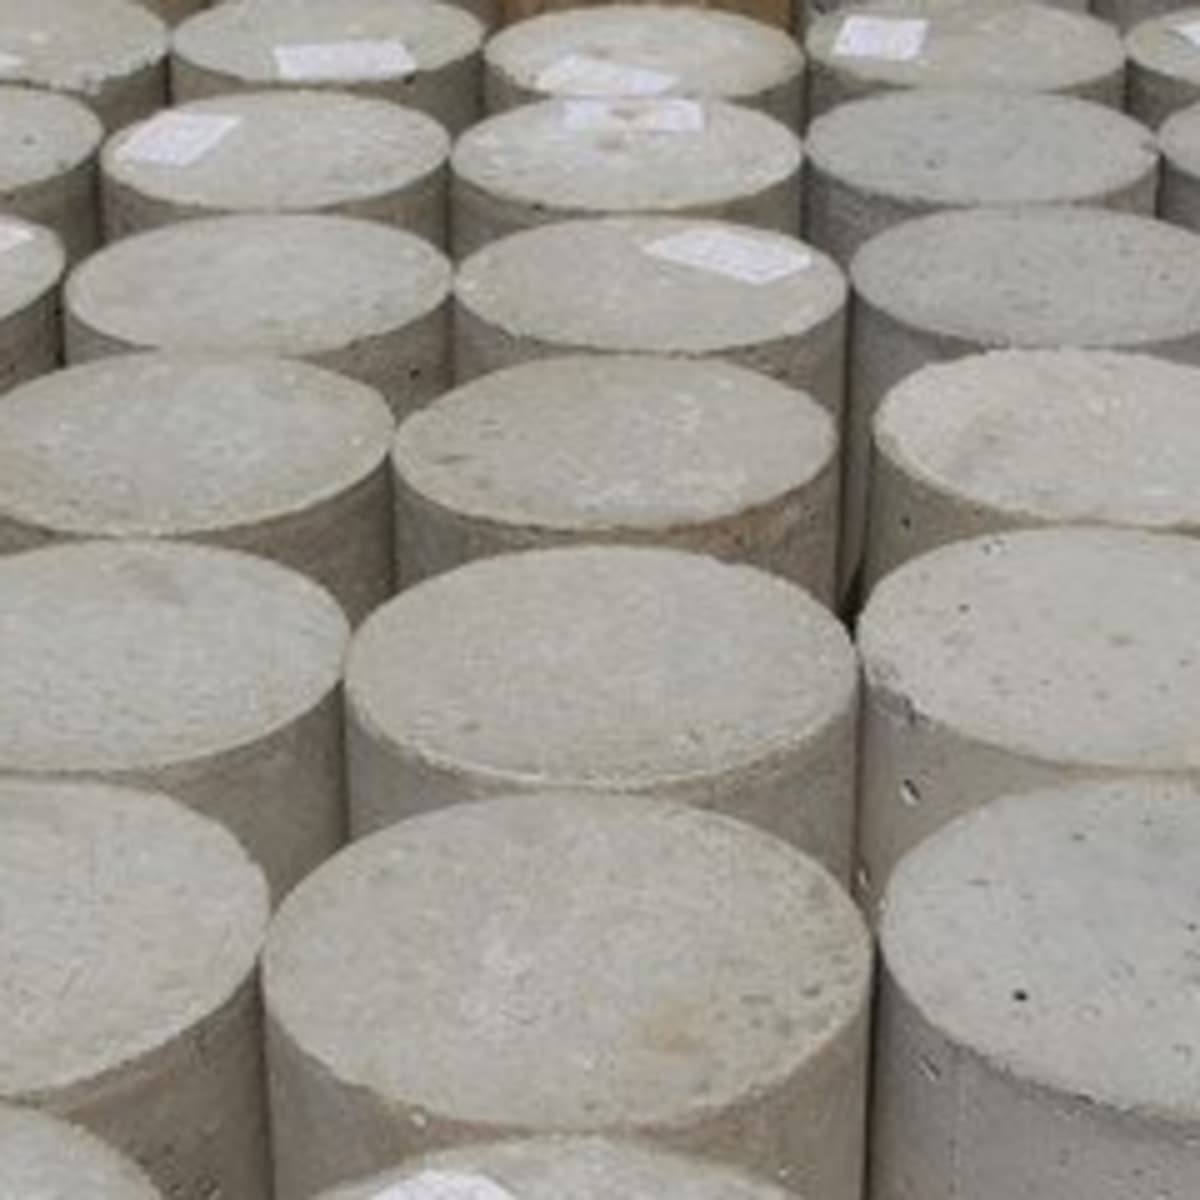 Preparation of concrete cylinders for compressive strength testing